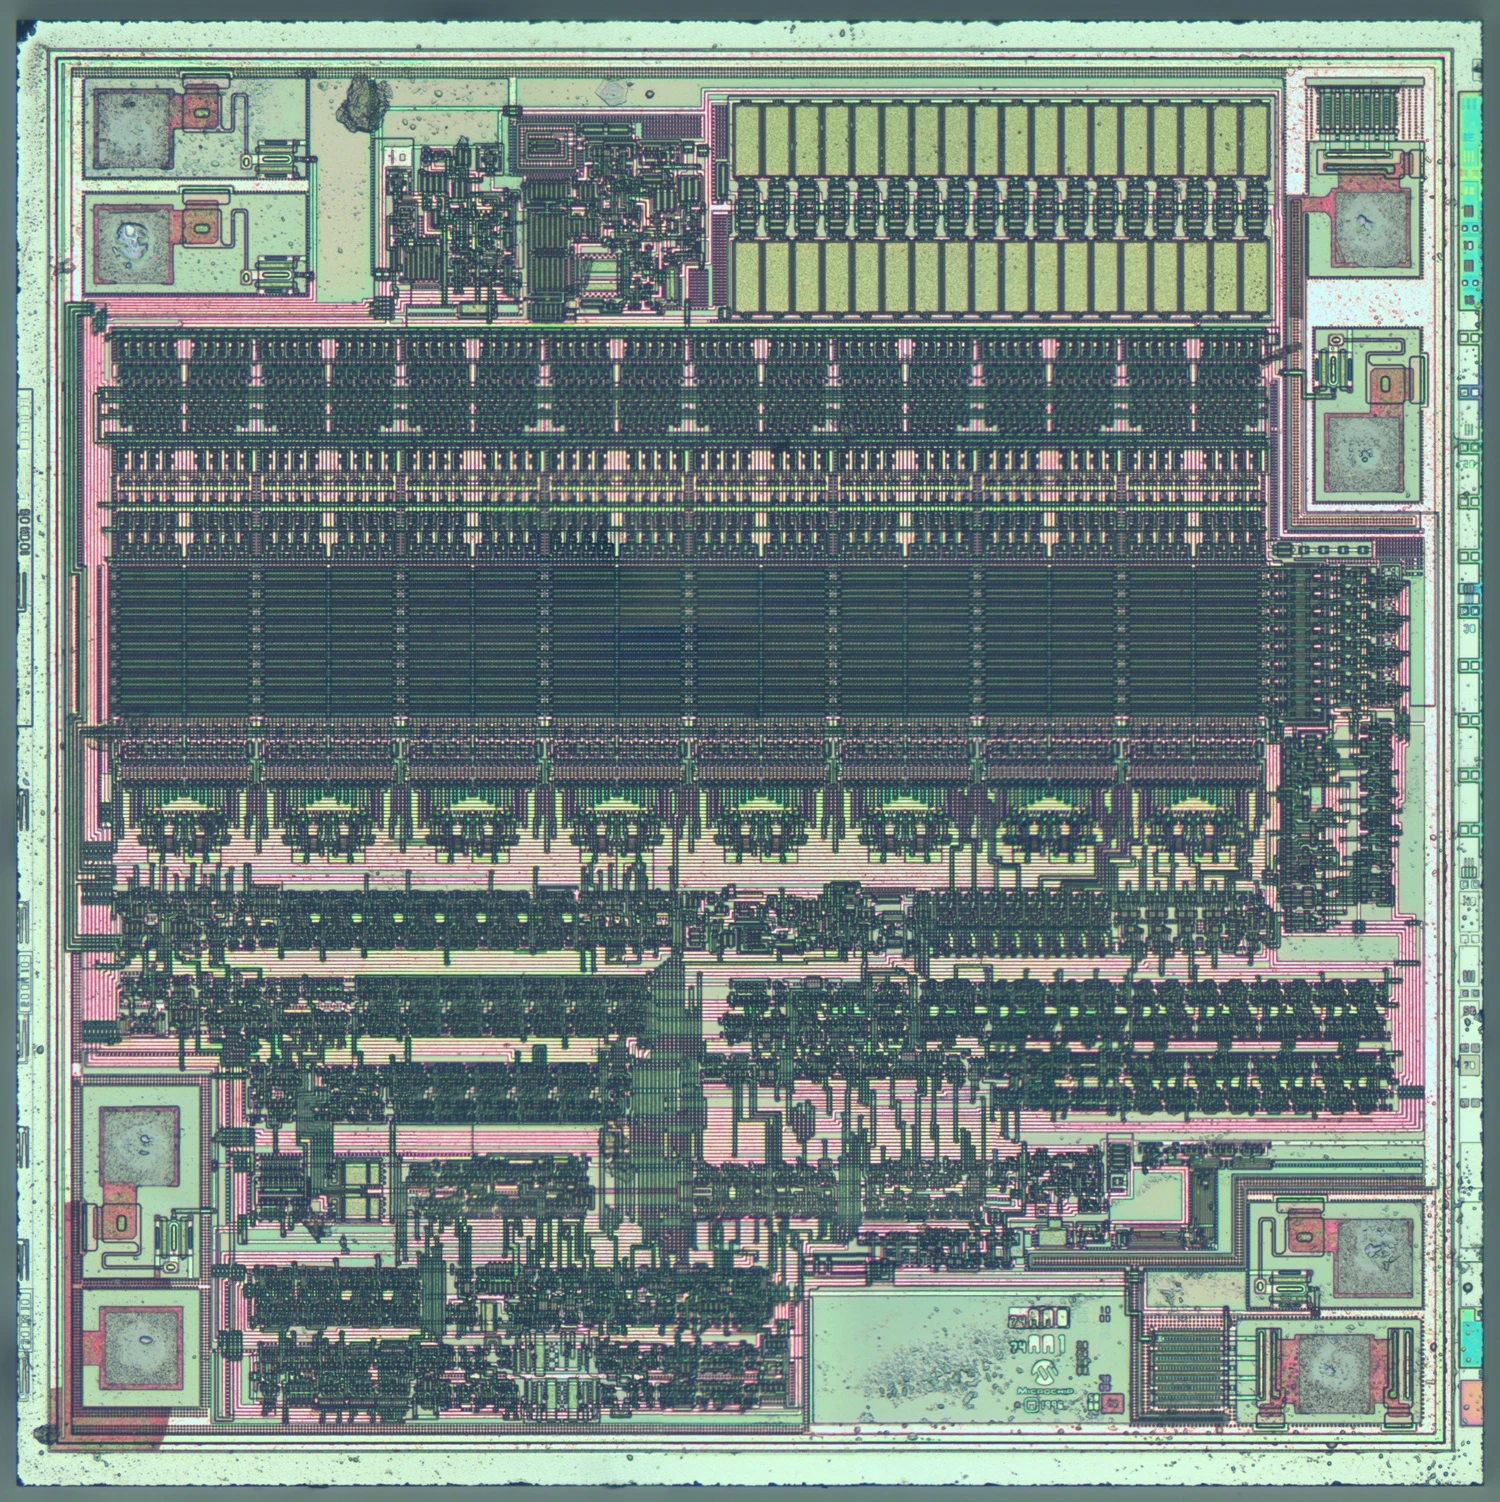 Microchip 24LCS52 is a 2048-bit EEPROM with an I2C interface. Die size 1880 by 1880µm, 2µm half-pitch technology. ZeptoBars, licensed under Creative Commons.-圖片